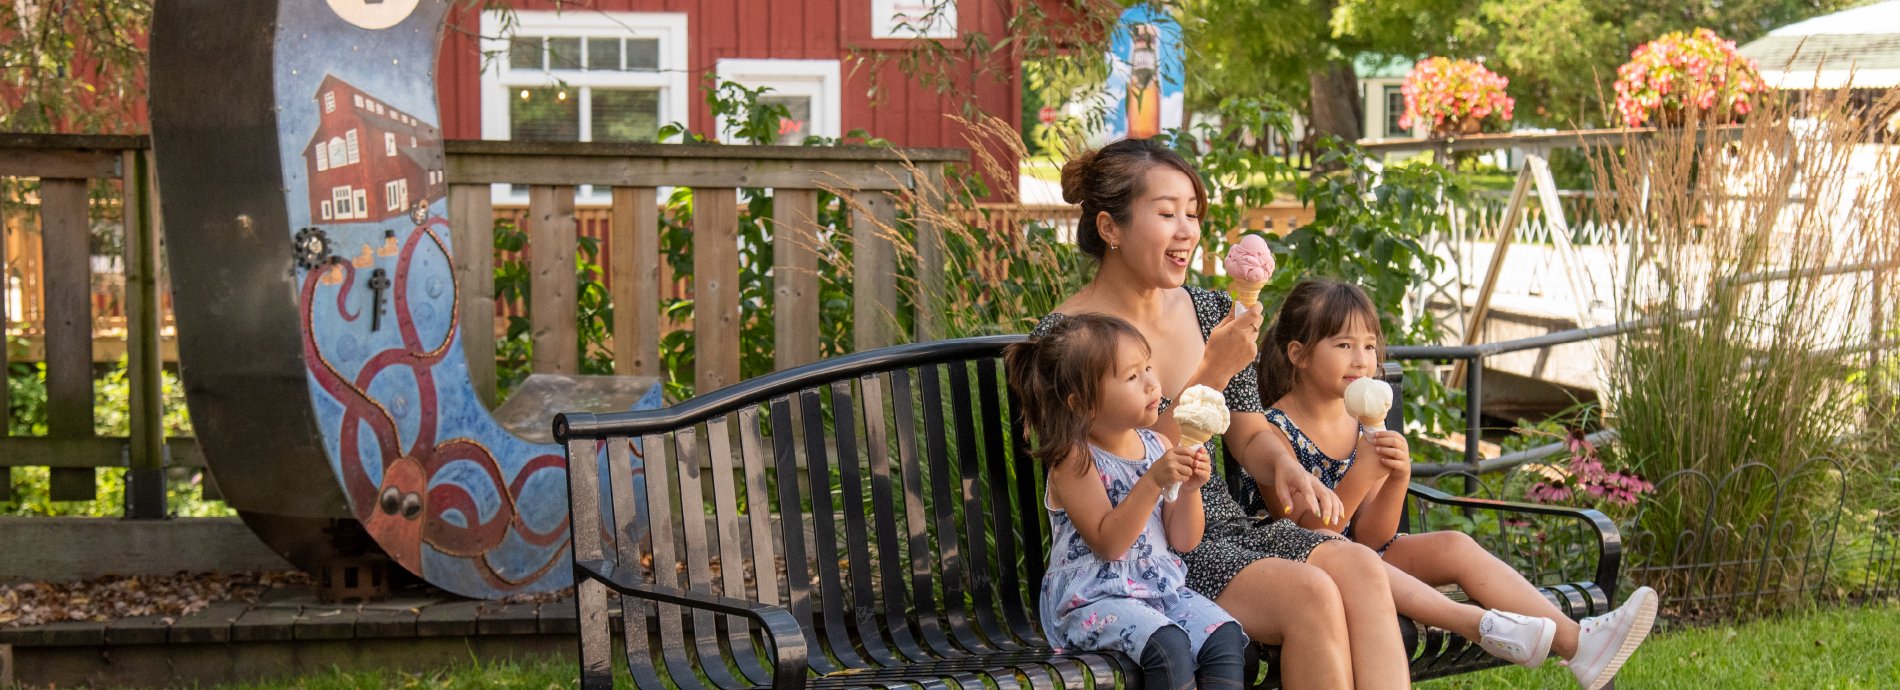 children and woman eating ice cream on a bench